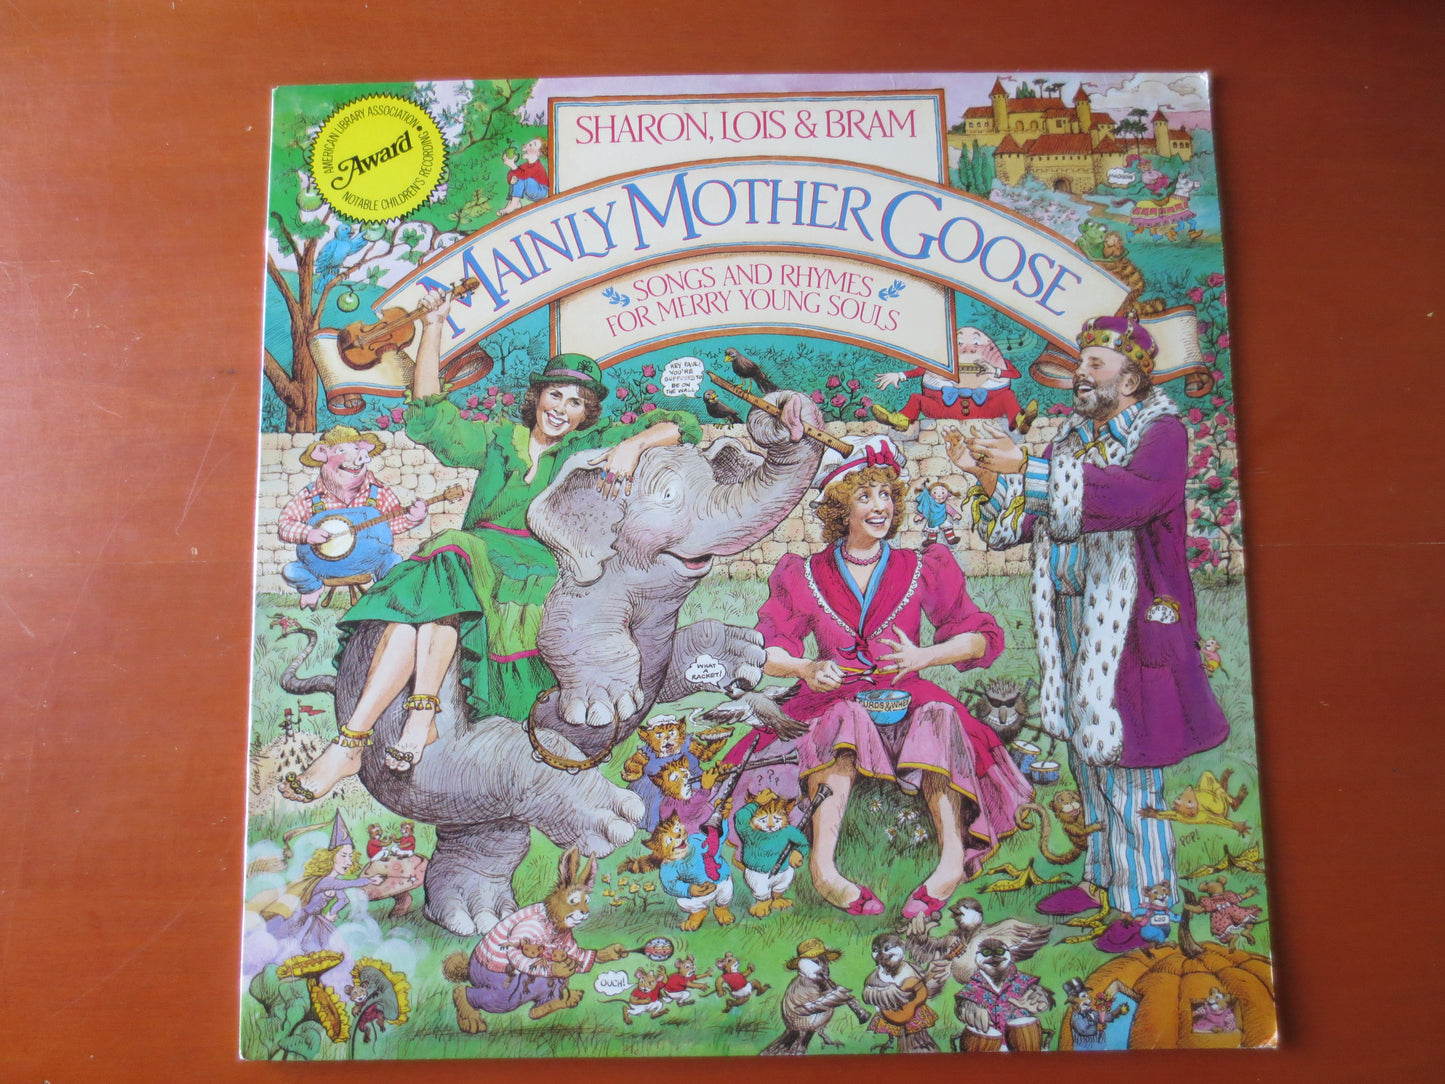 SHARON, LOIS and BRAM, Mainly Mother Goose, Childrens Records, Kids Records, Vintage Vinyl, Vinyl Record, Lps, 1984 Records